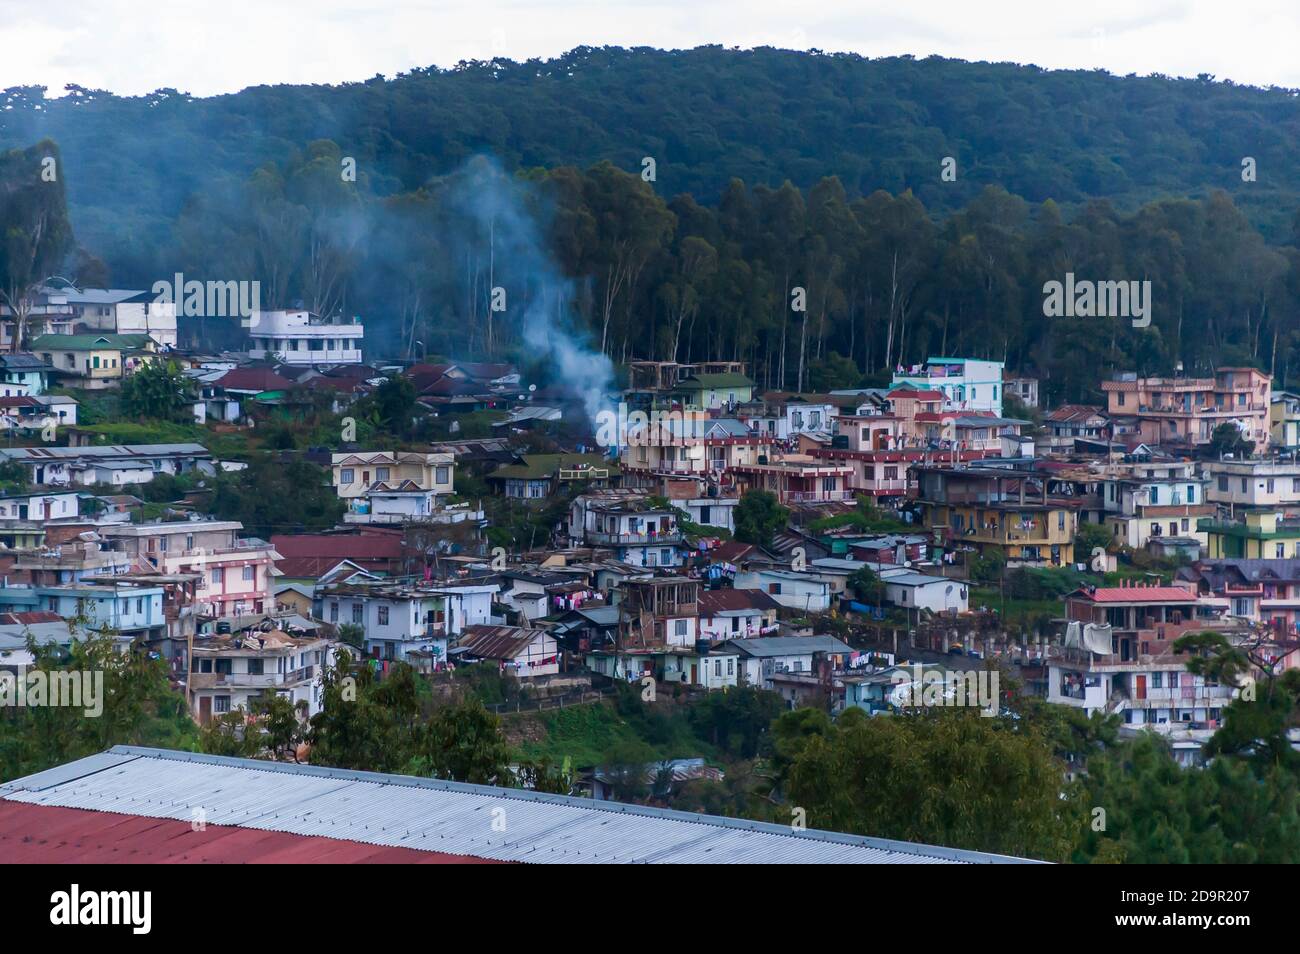 Smoke rises from an outdoor fire in a residential area in Shillong, Meghalaya, India. Poor urban planning makes the locality look like a favela. Stock Photo